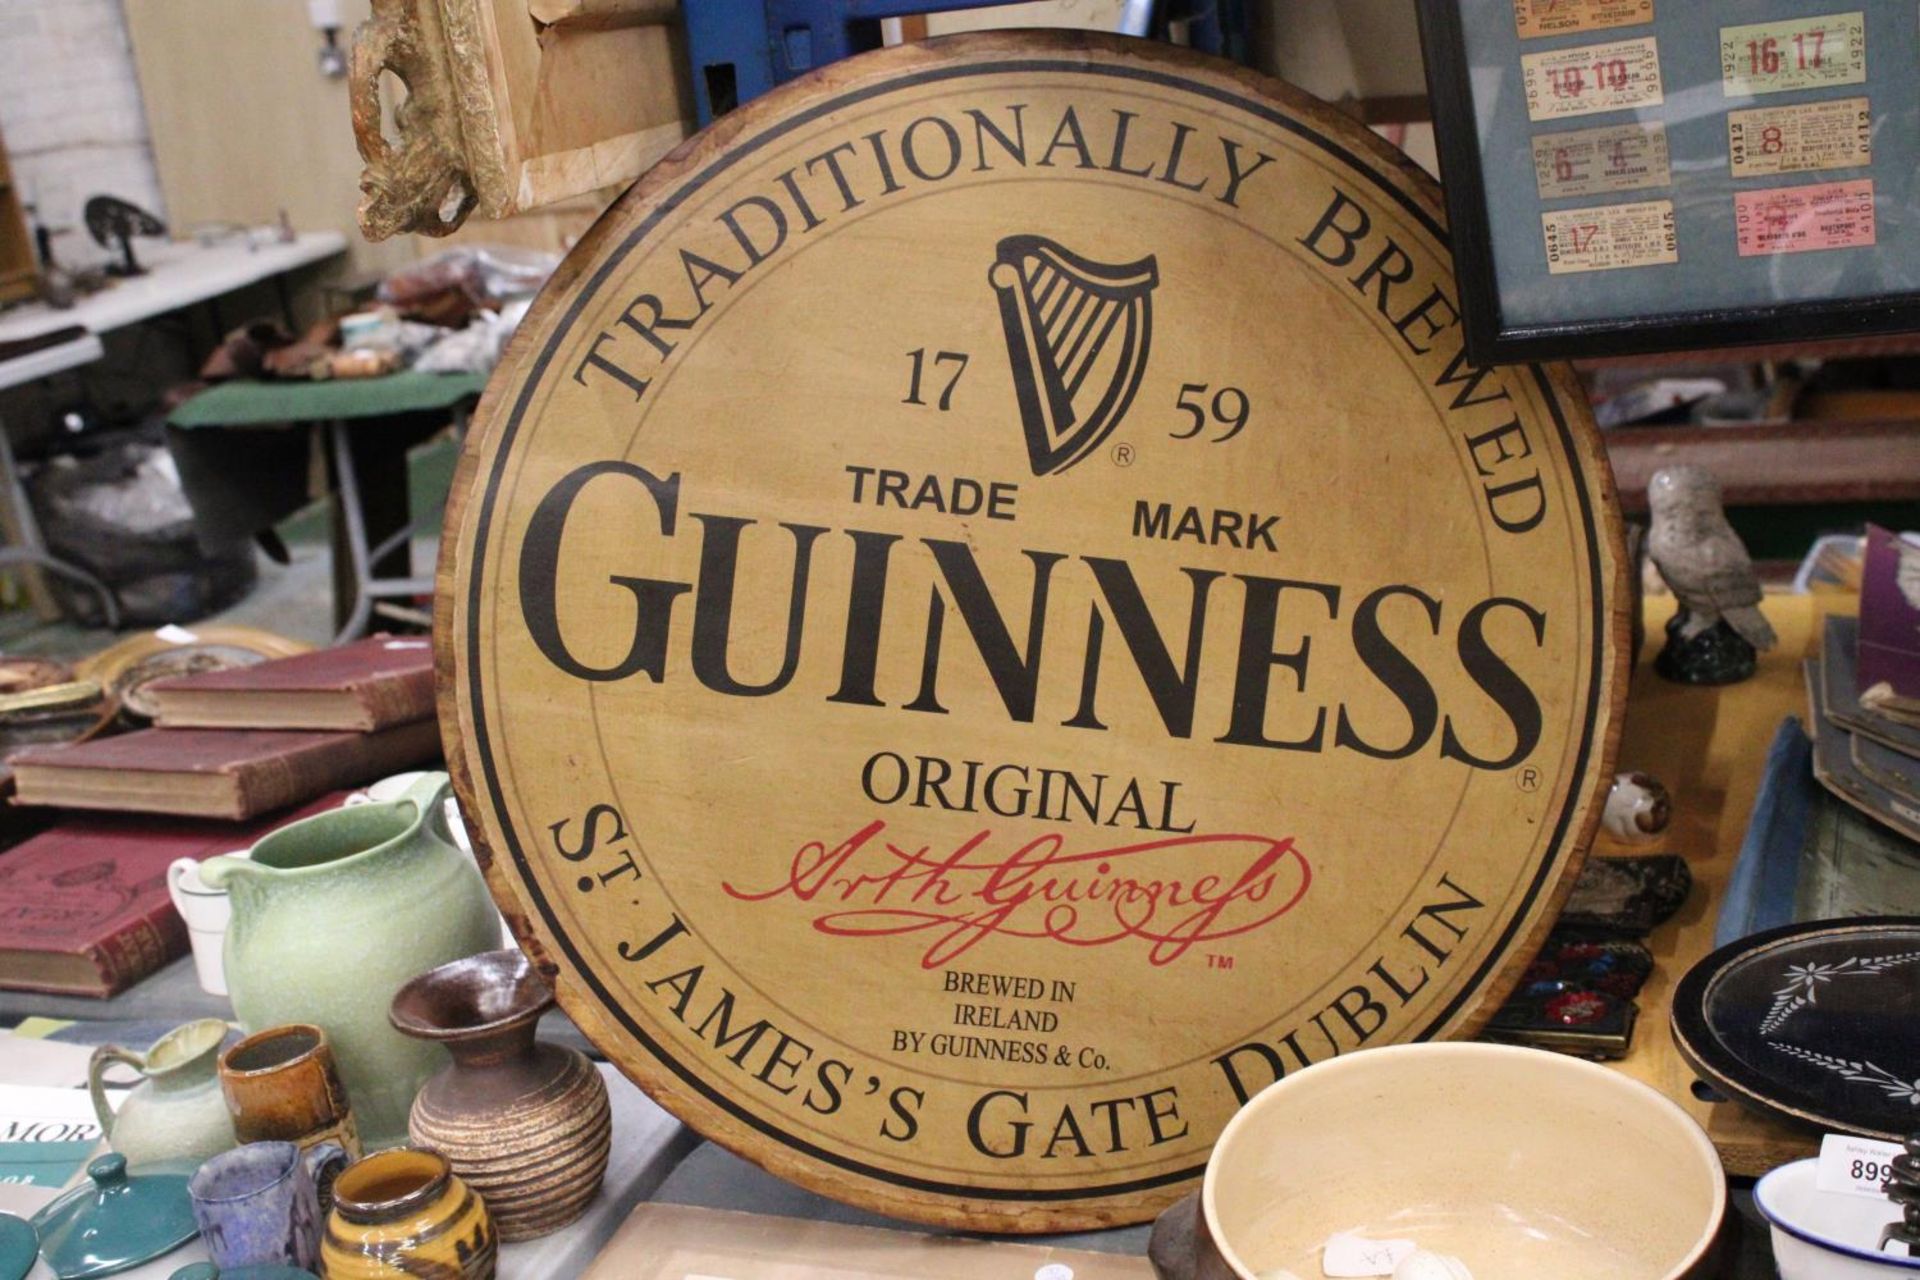 A LARGE WOODEN CIRCULAR GUINESS ADVERTISING SIGN 24" DIAMETER